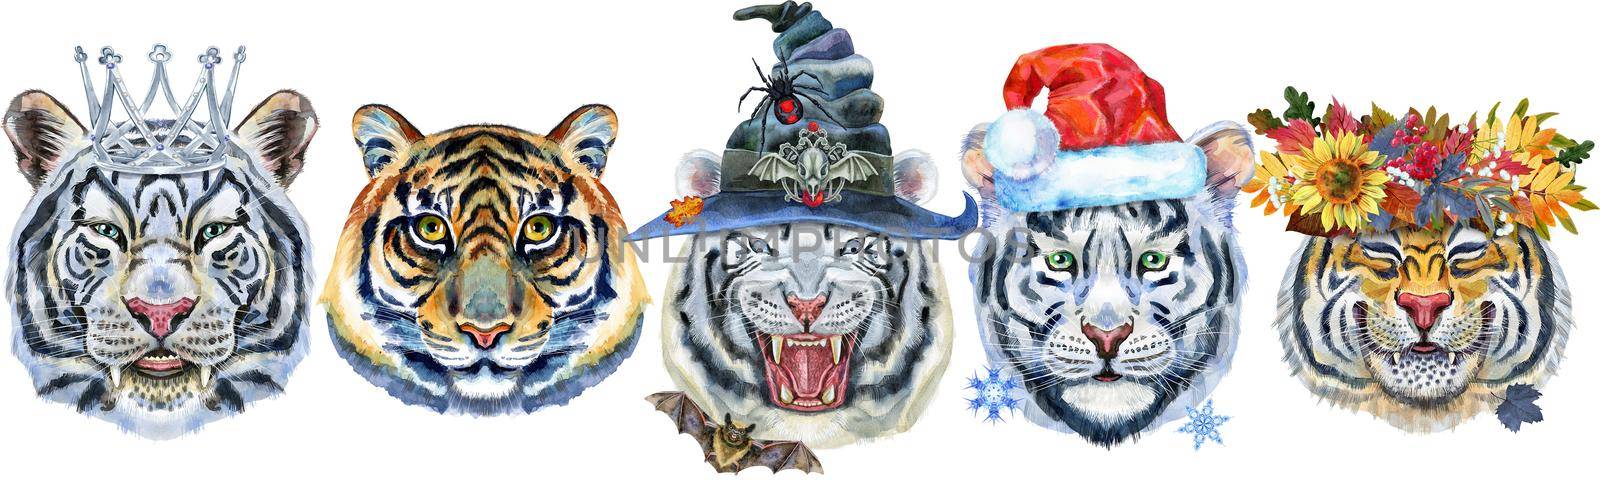 Tiger border with various accessories . Wild animal watercolor illustration on white background by NataOmsk